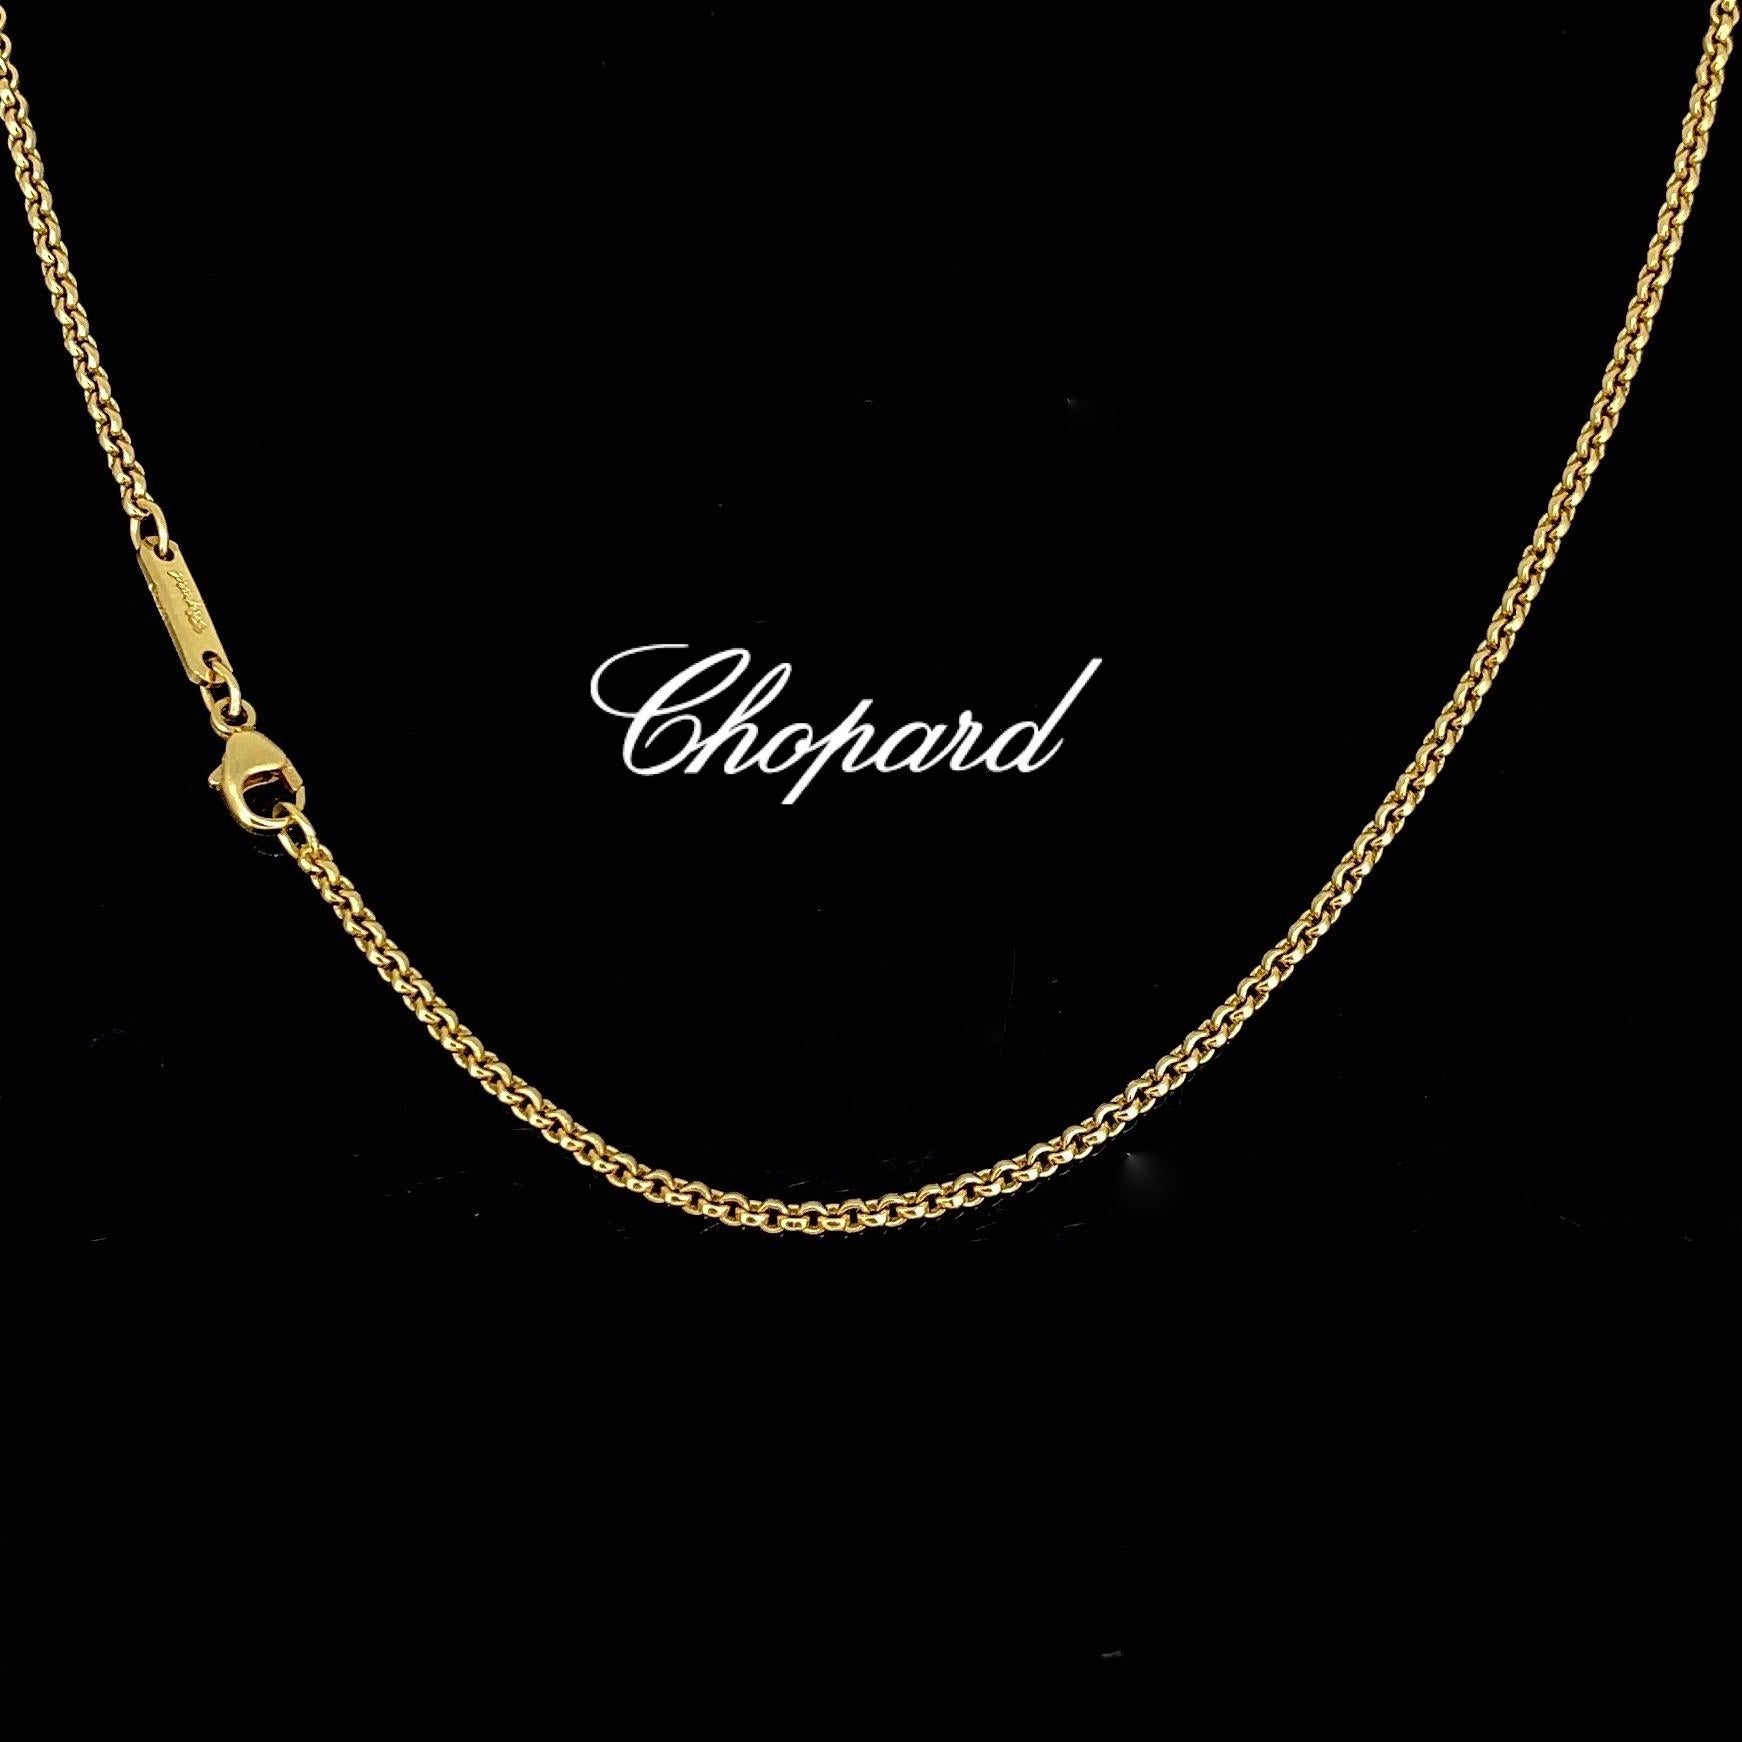 Women's or Men's Chopard Yellow Gold Chain Necklace